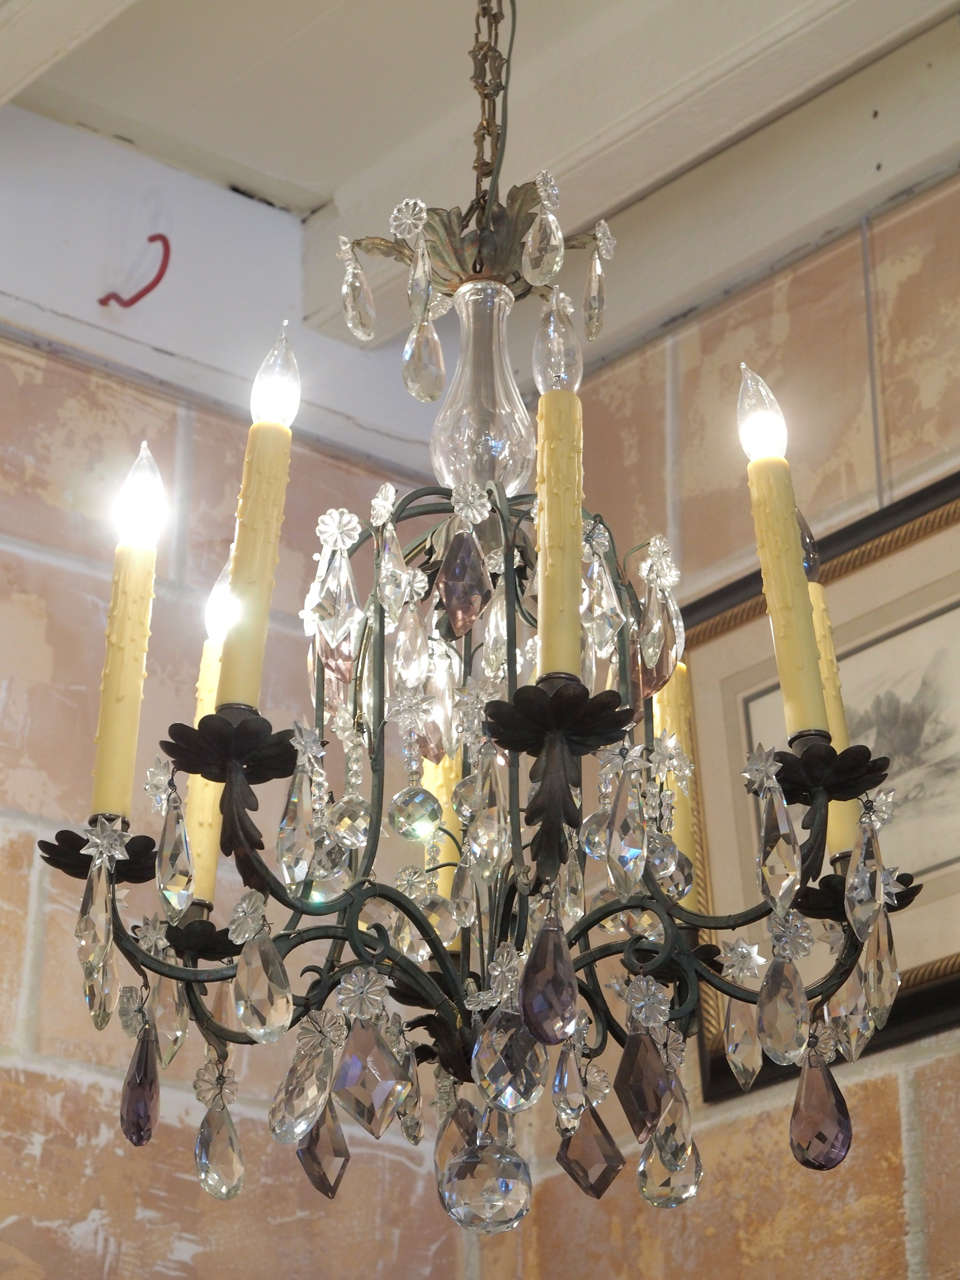 19th century French eight-arm chandelier in the Louis XVI taste, with accents of pale amethyst crystals.